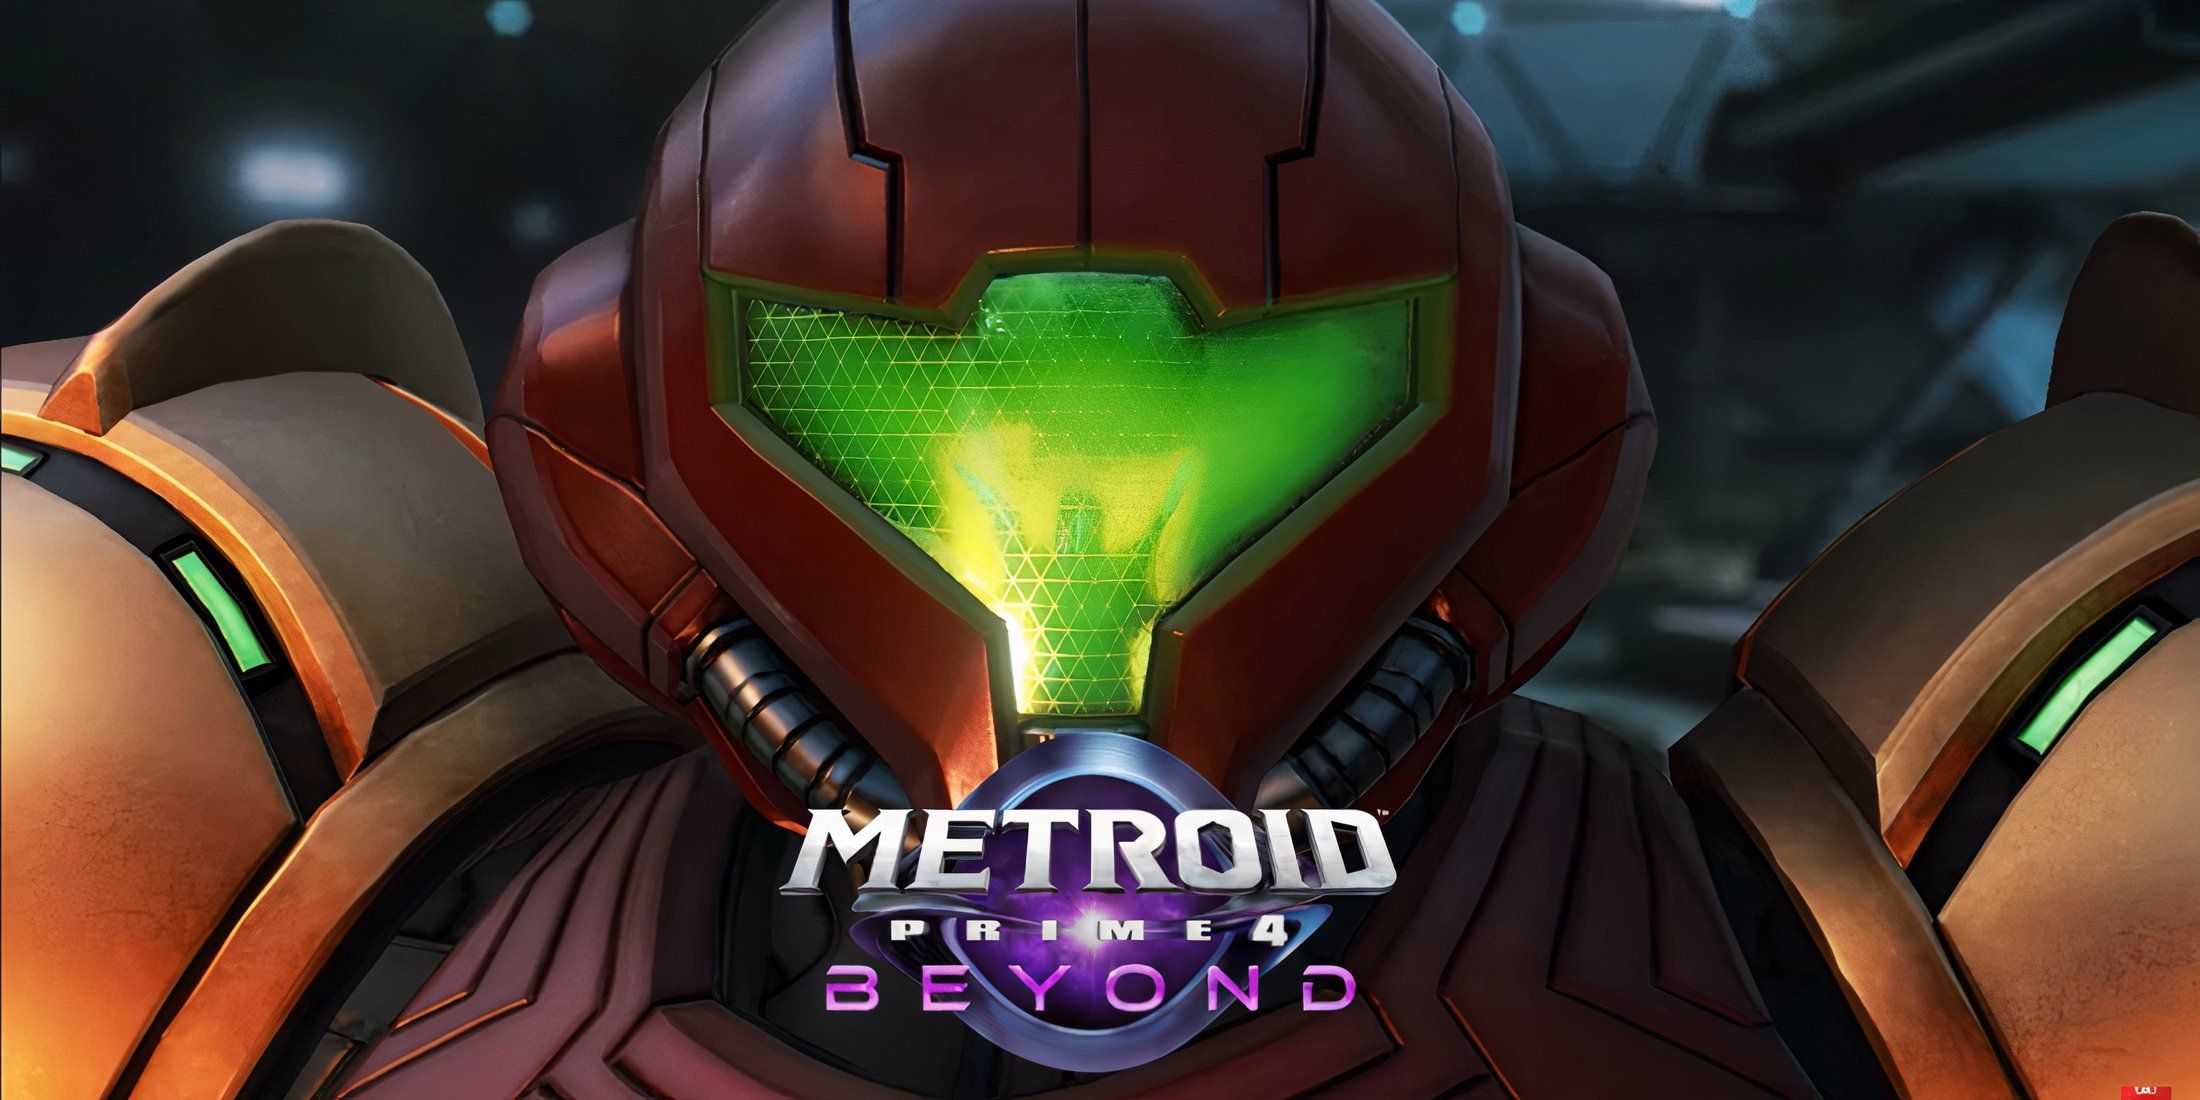 Metroid Prime 4 Beyond's Graphics Are Already a Huge Upgrade